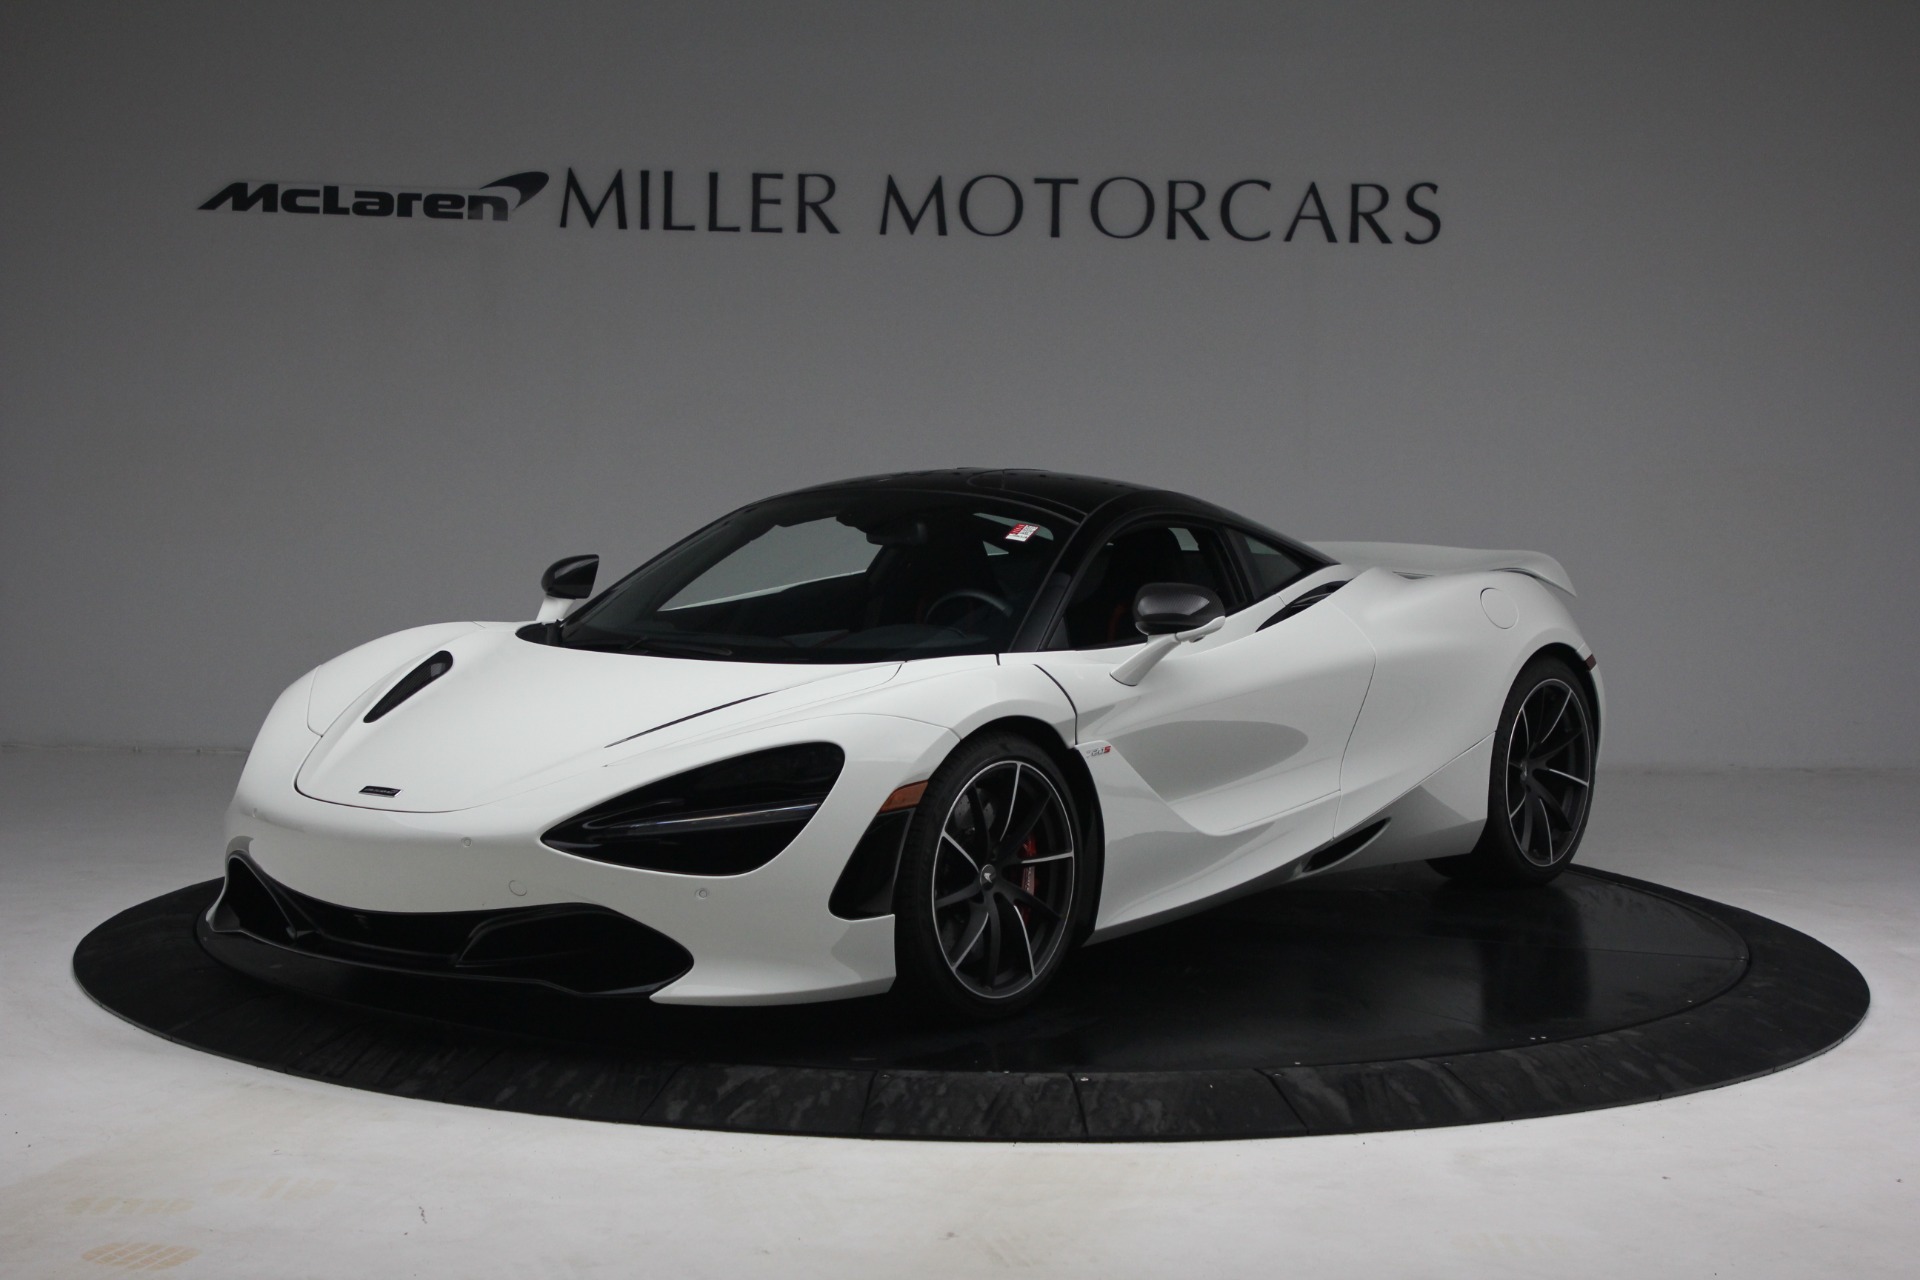 Used 2021 McLaren 720S Performance for sale Sold at Bentley Greenwich in Greenwich CT 06830 1